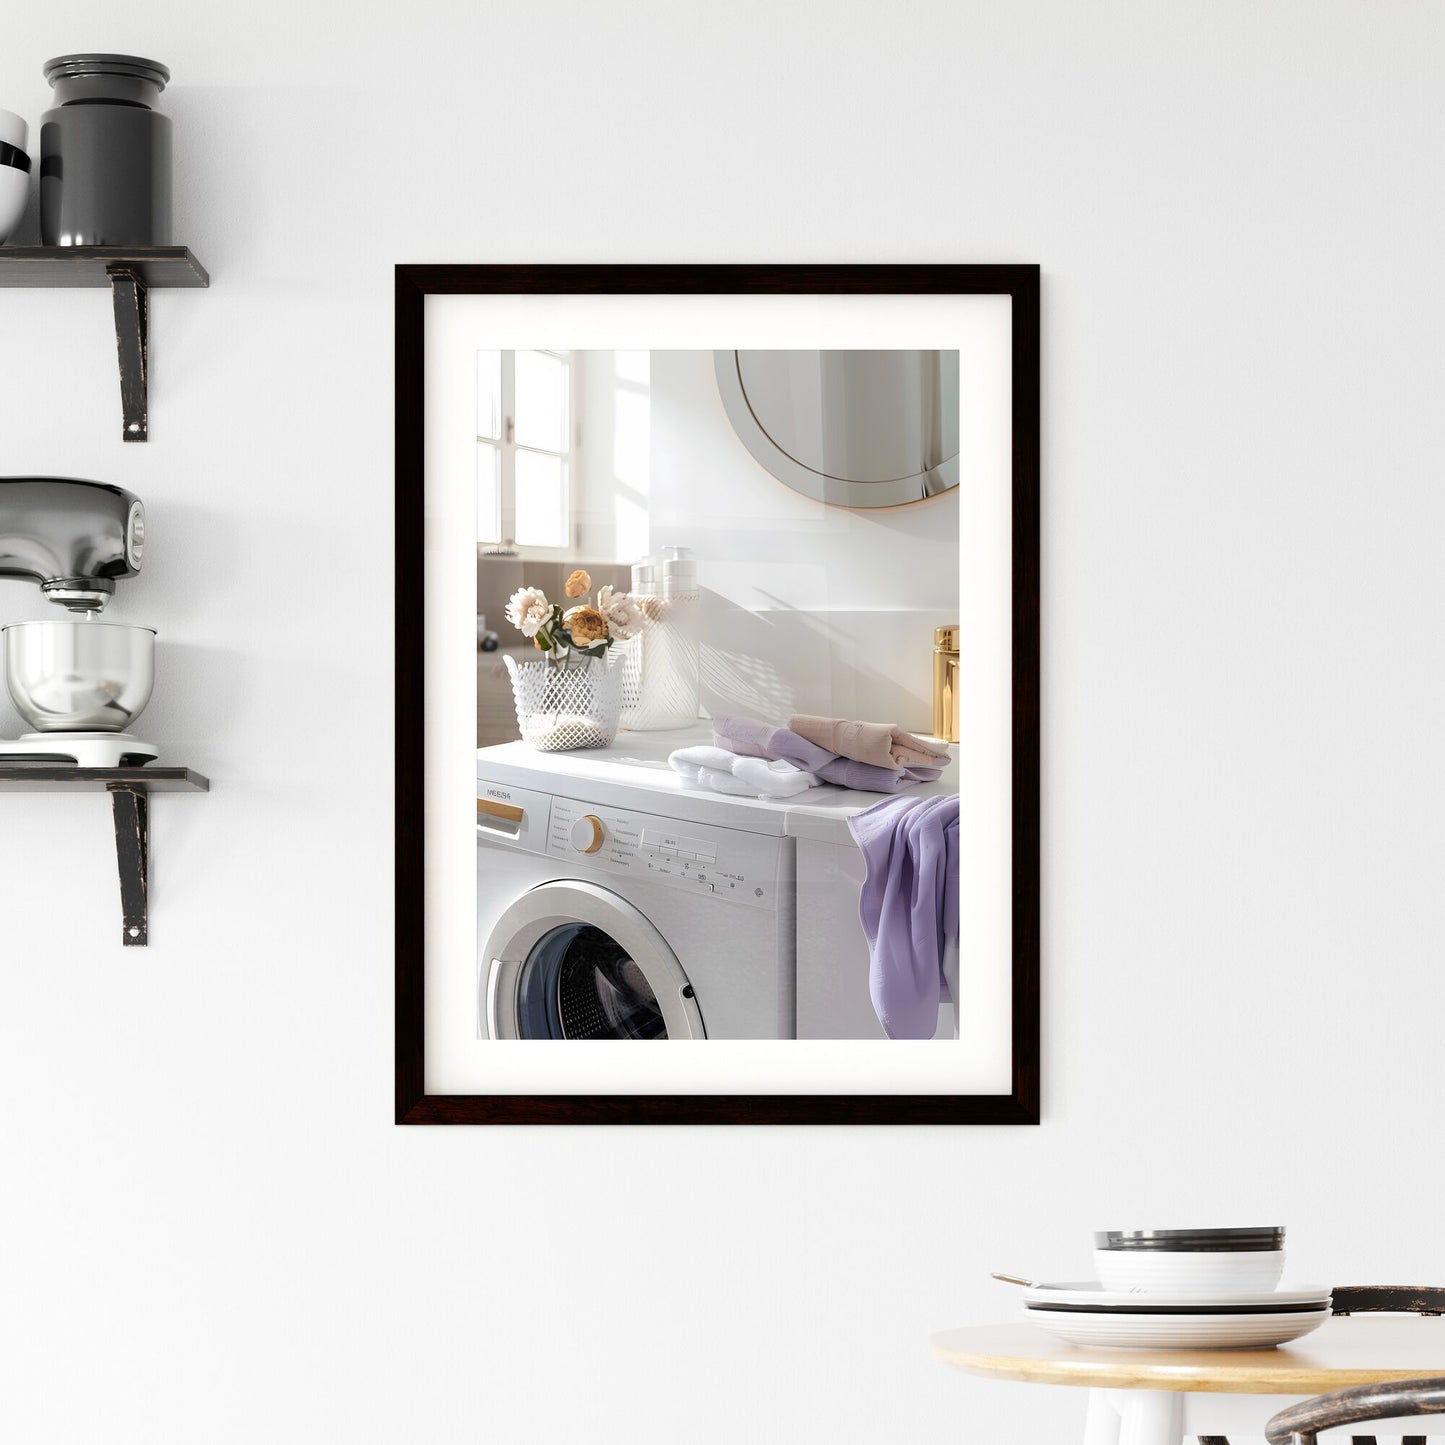 Vibrant Laundry Room Still Life with White Walls, Open Washing Machine, Stacked Colorful Items, Natural Wood Elements, Large Round Mirror, Laundry Basket, and Floral Painting Default Title